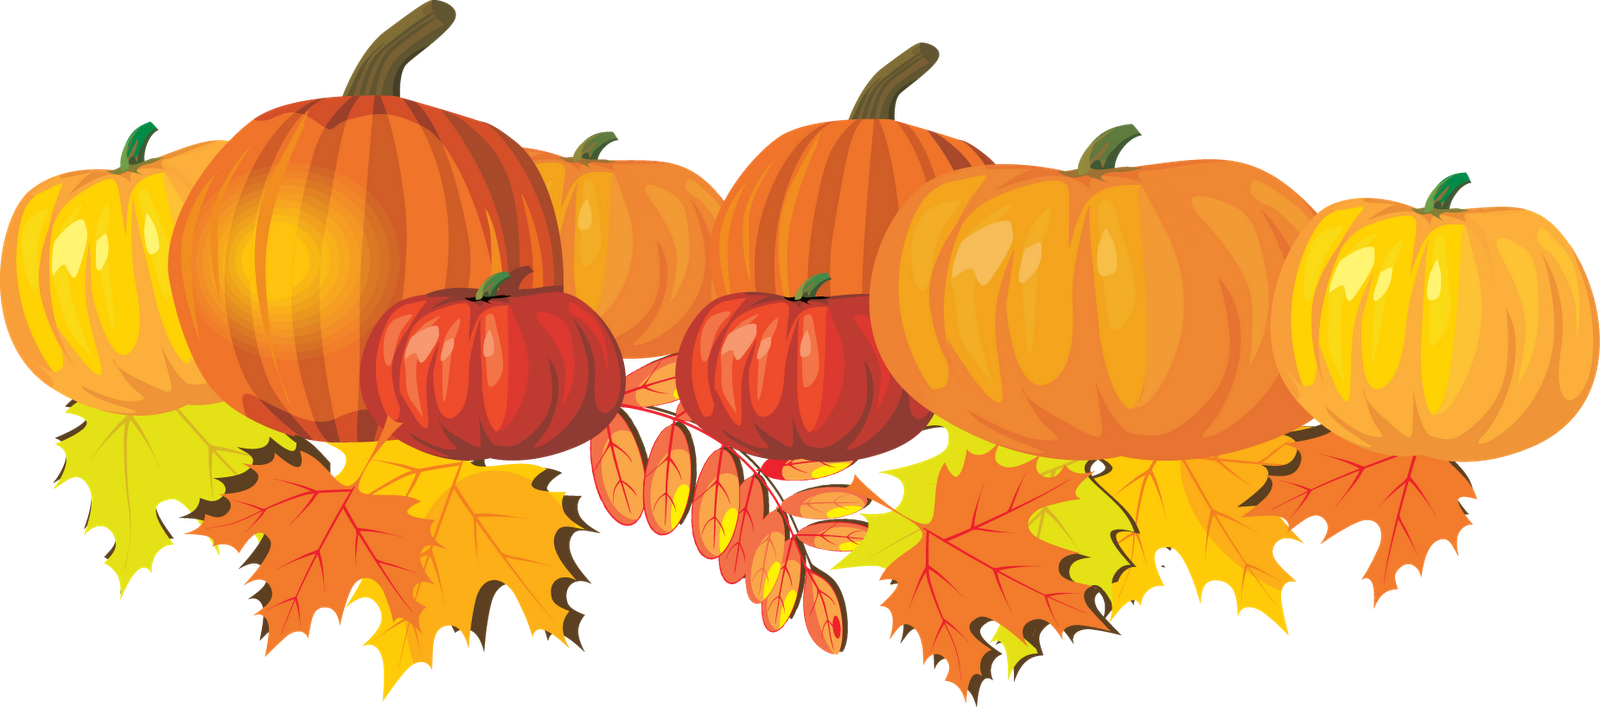 free clipart of fall scenes - photo #49